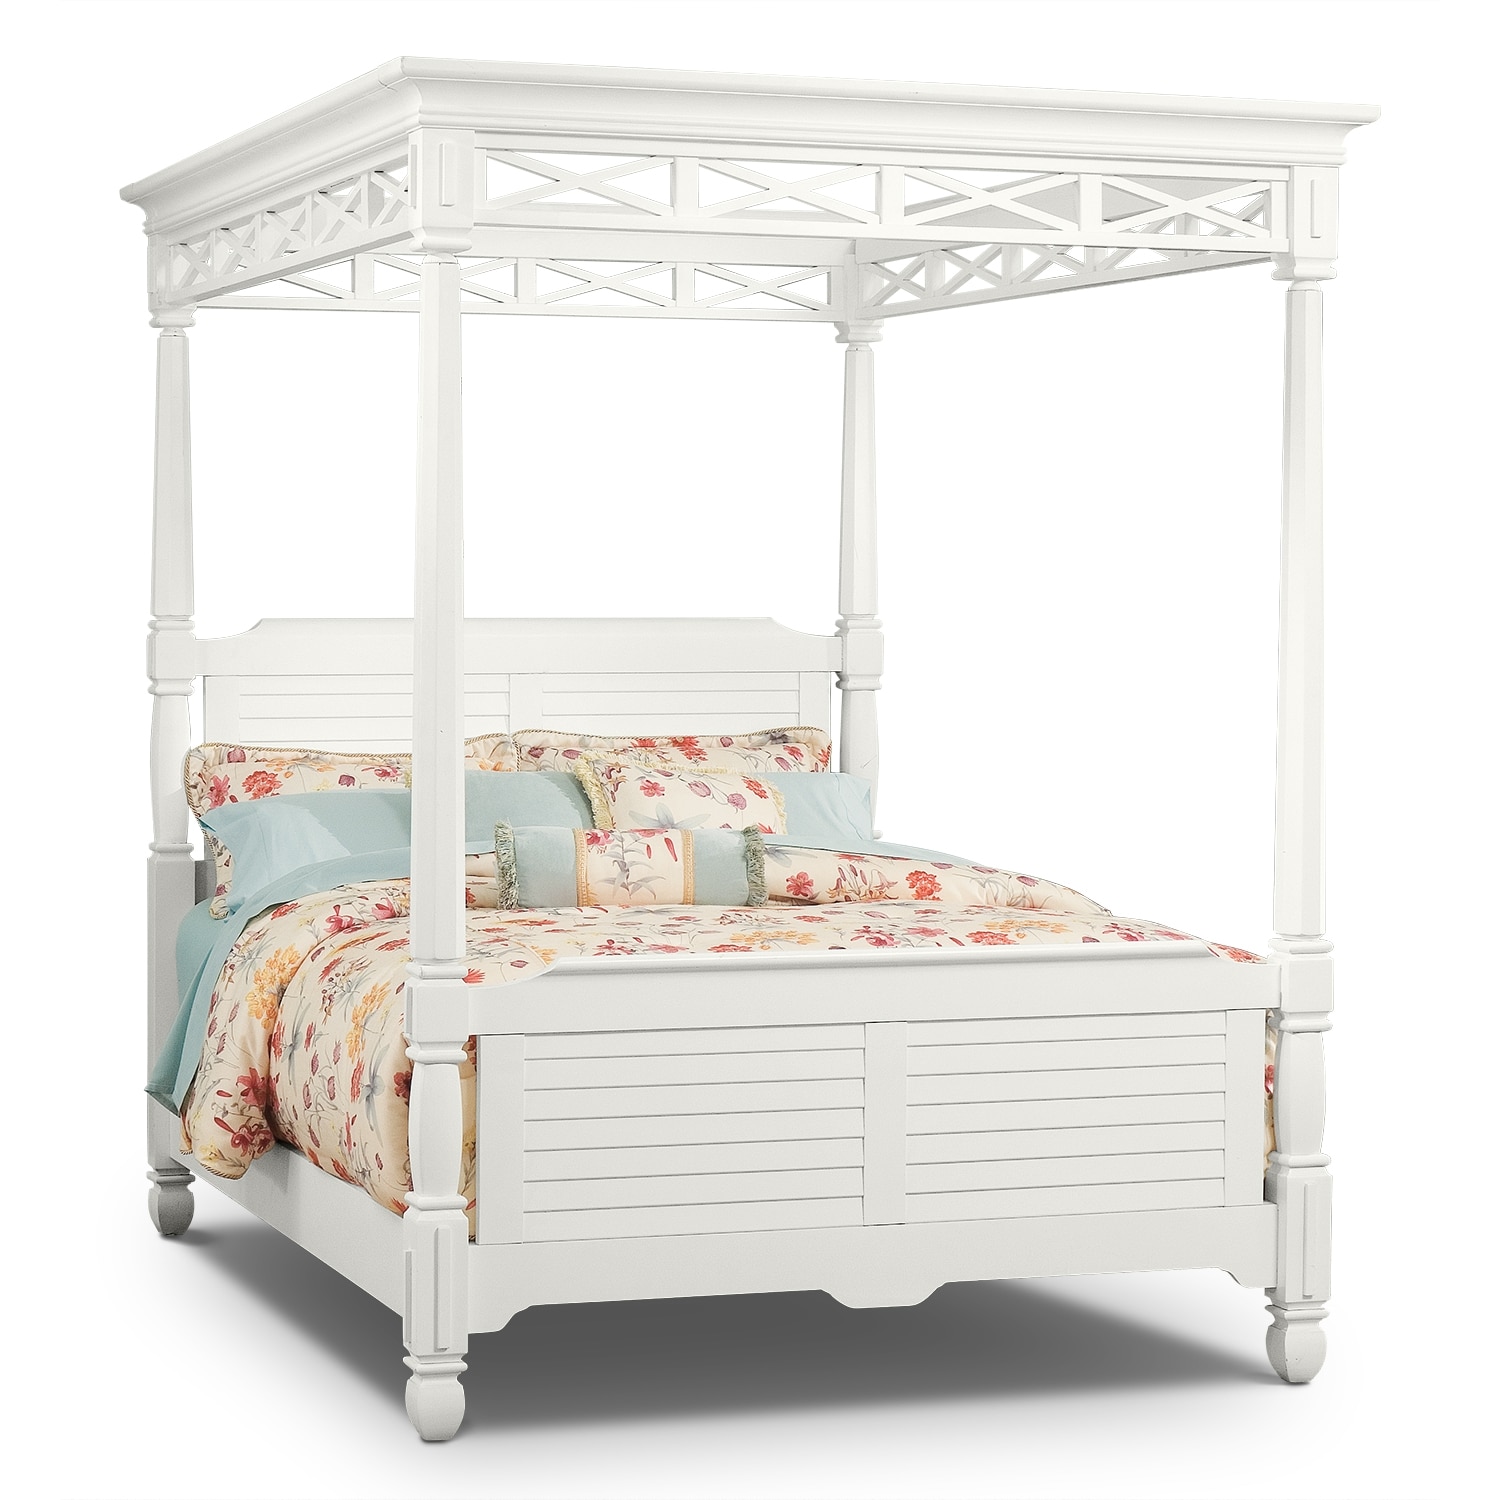 Coveted Choice. Our Plantation Cove White Canopy Queen bed is fresh ...